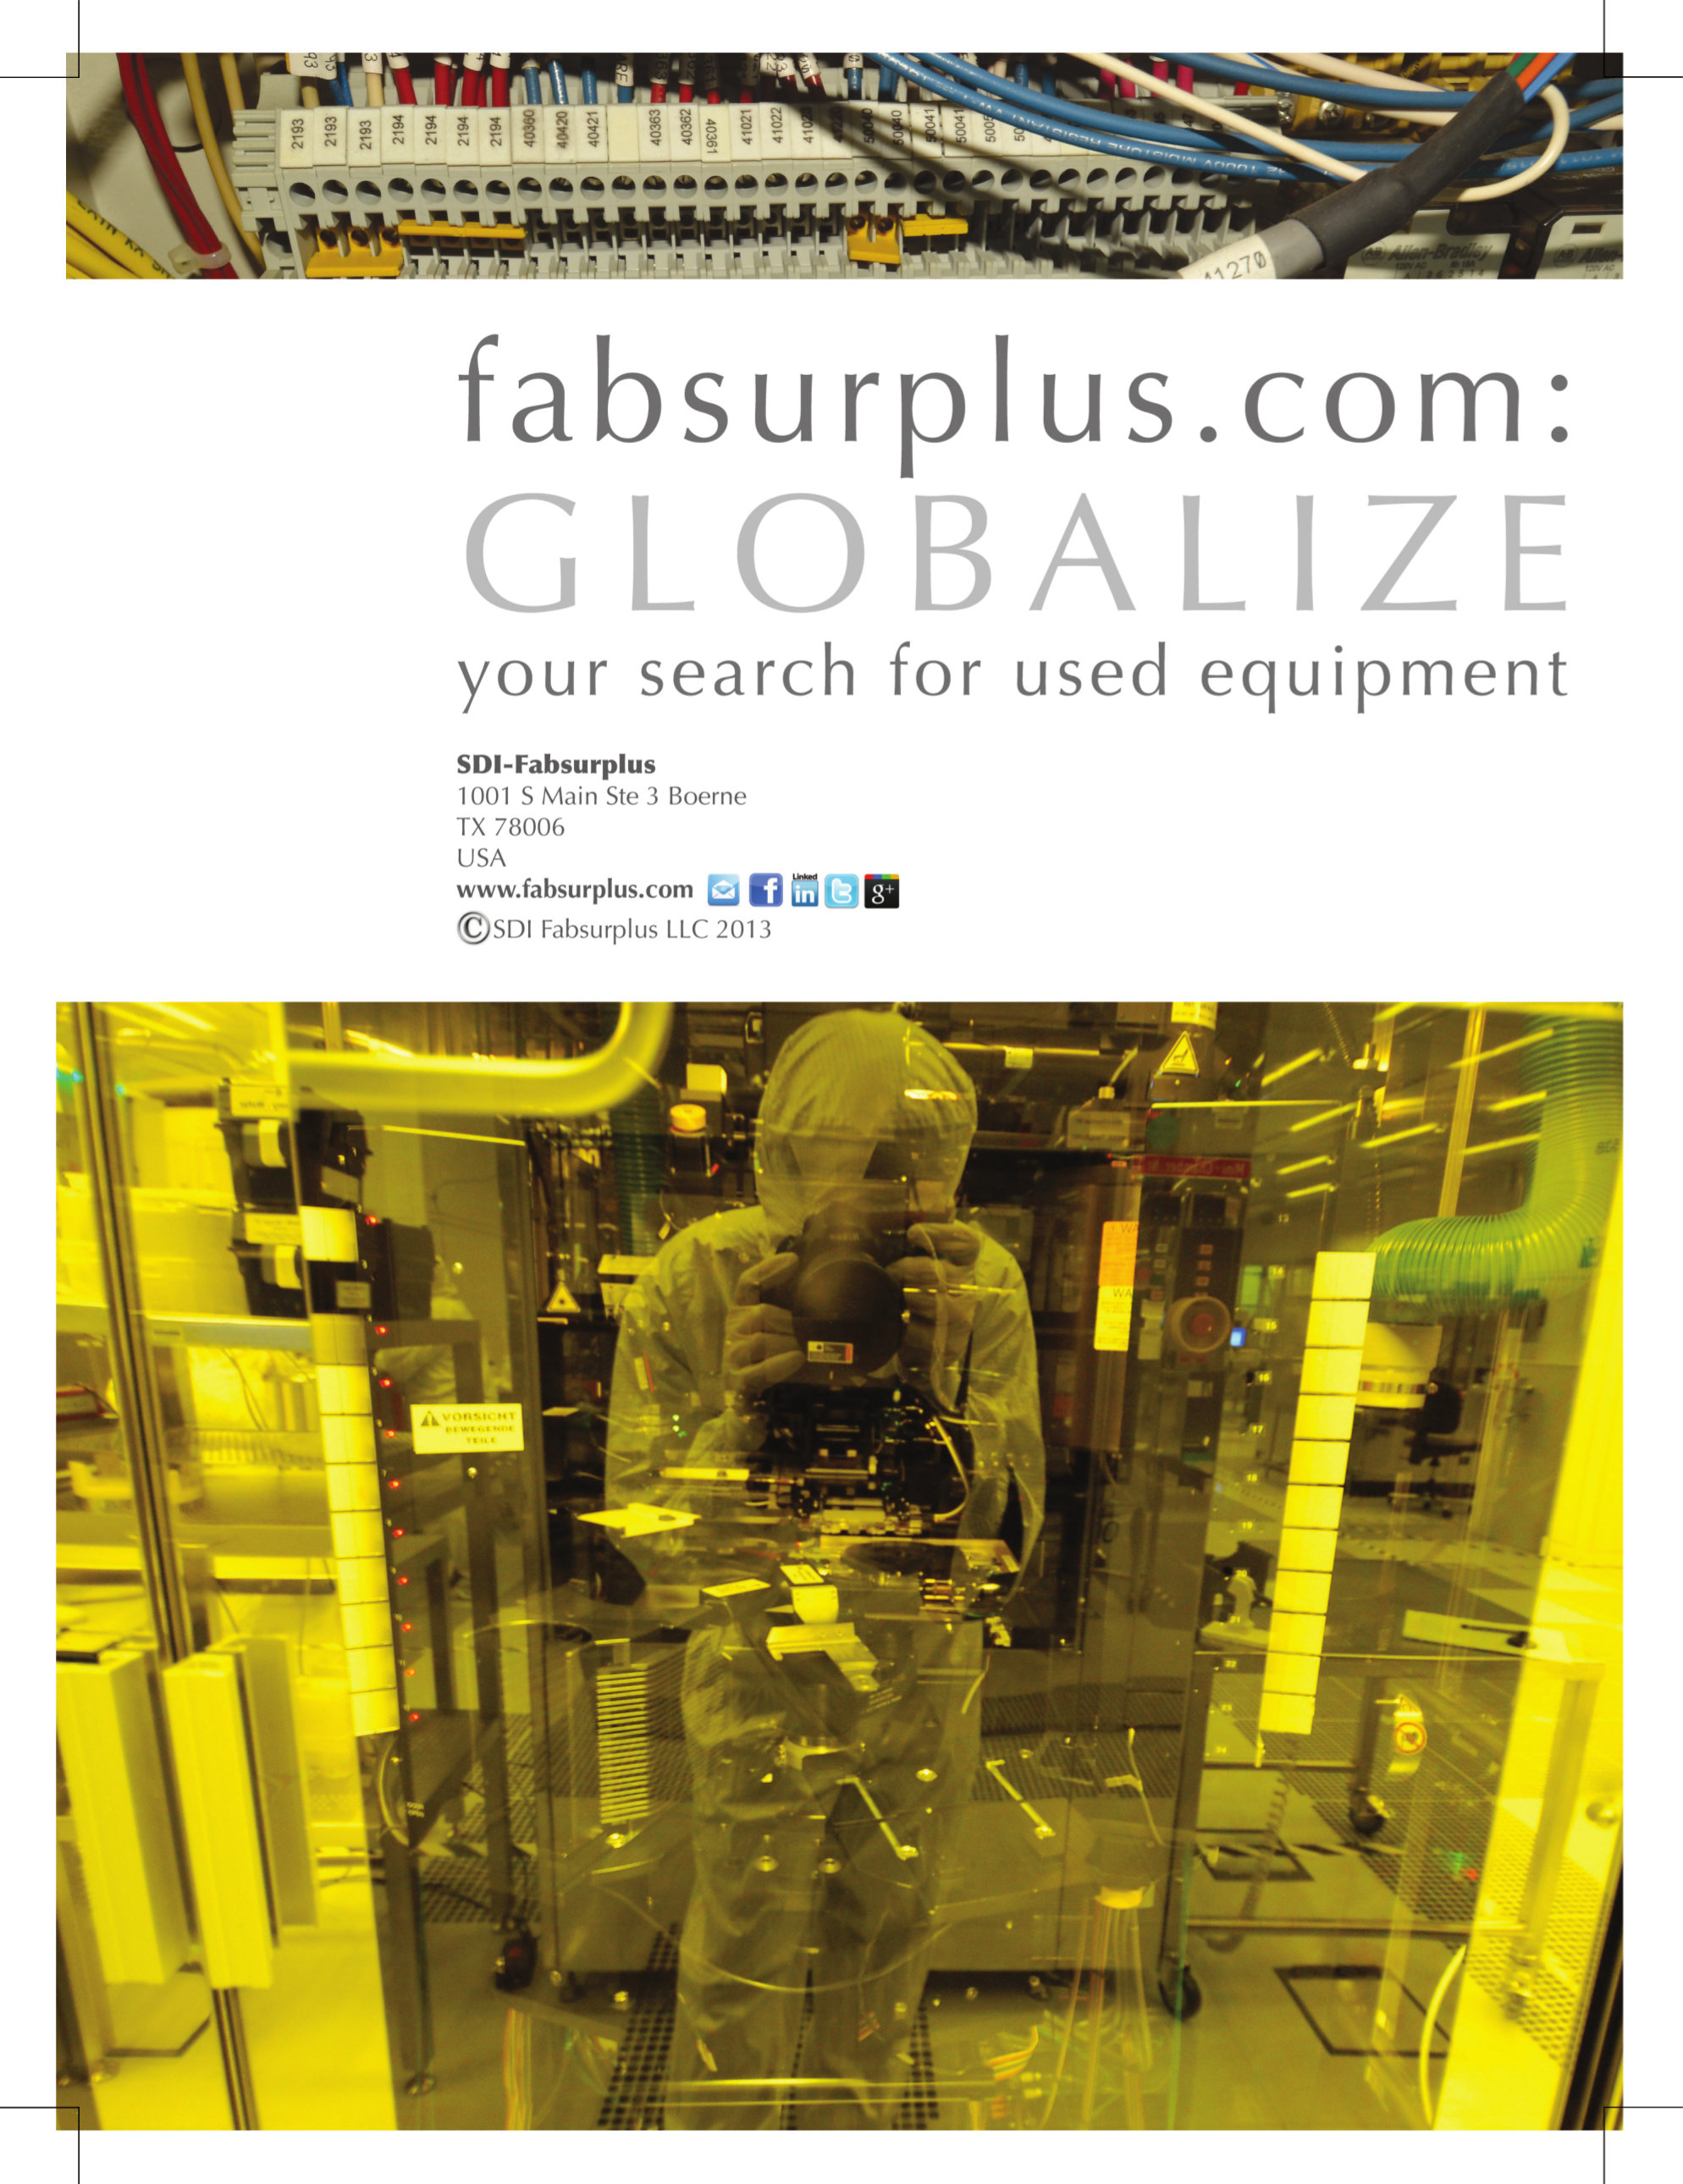 Globalize your search for used equipment